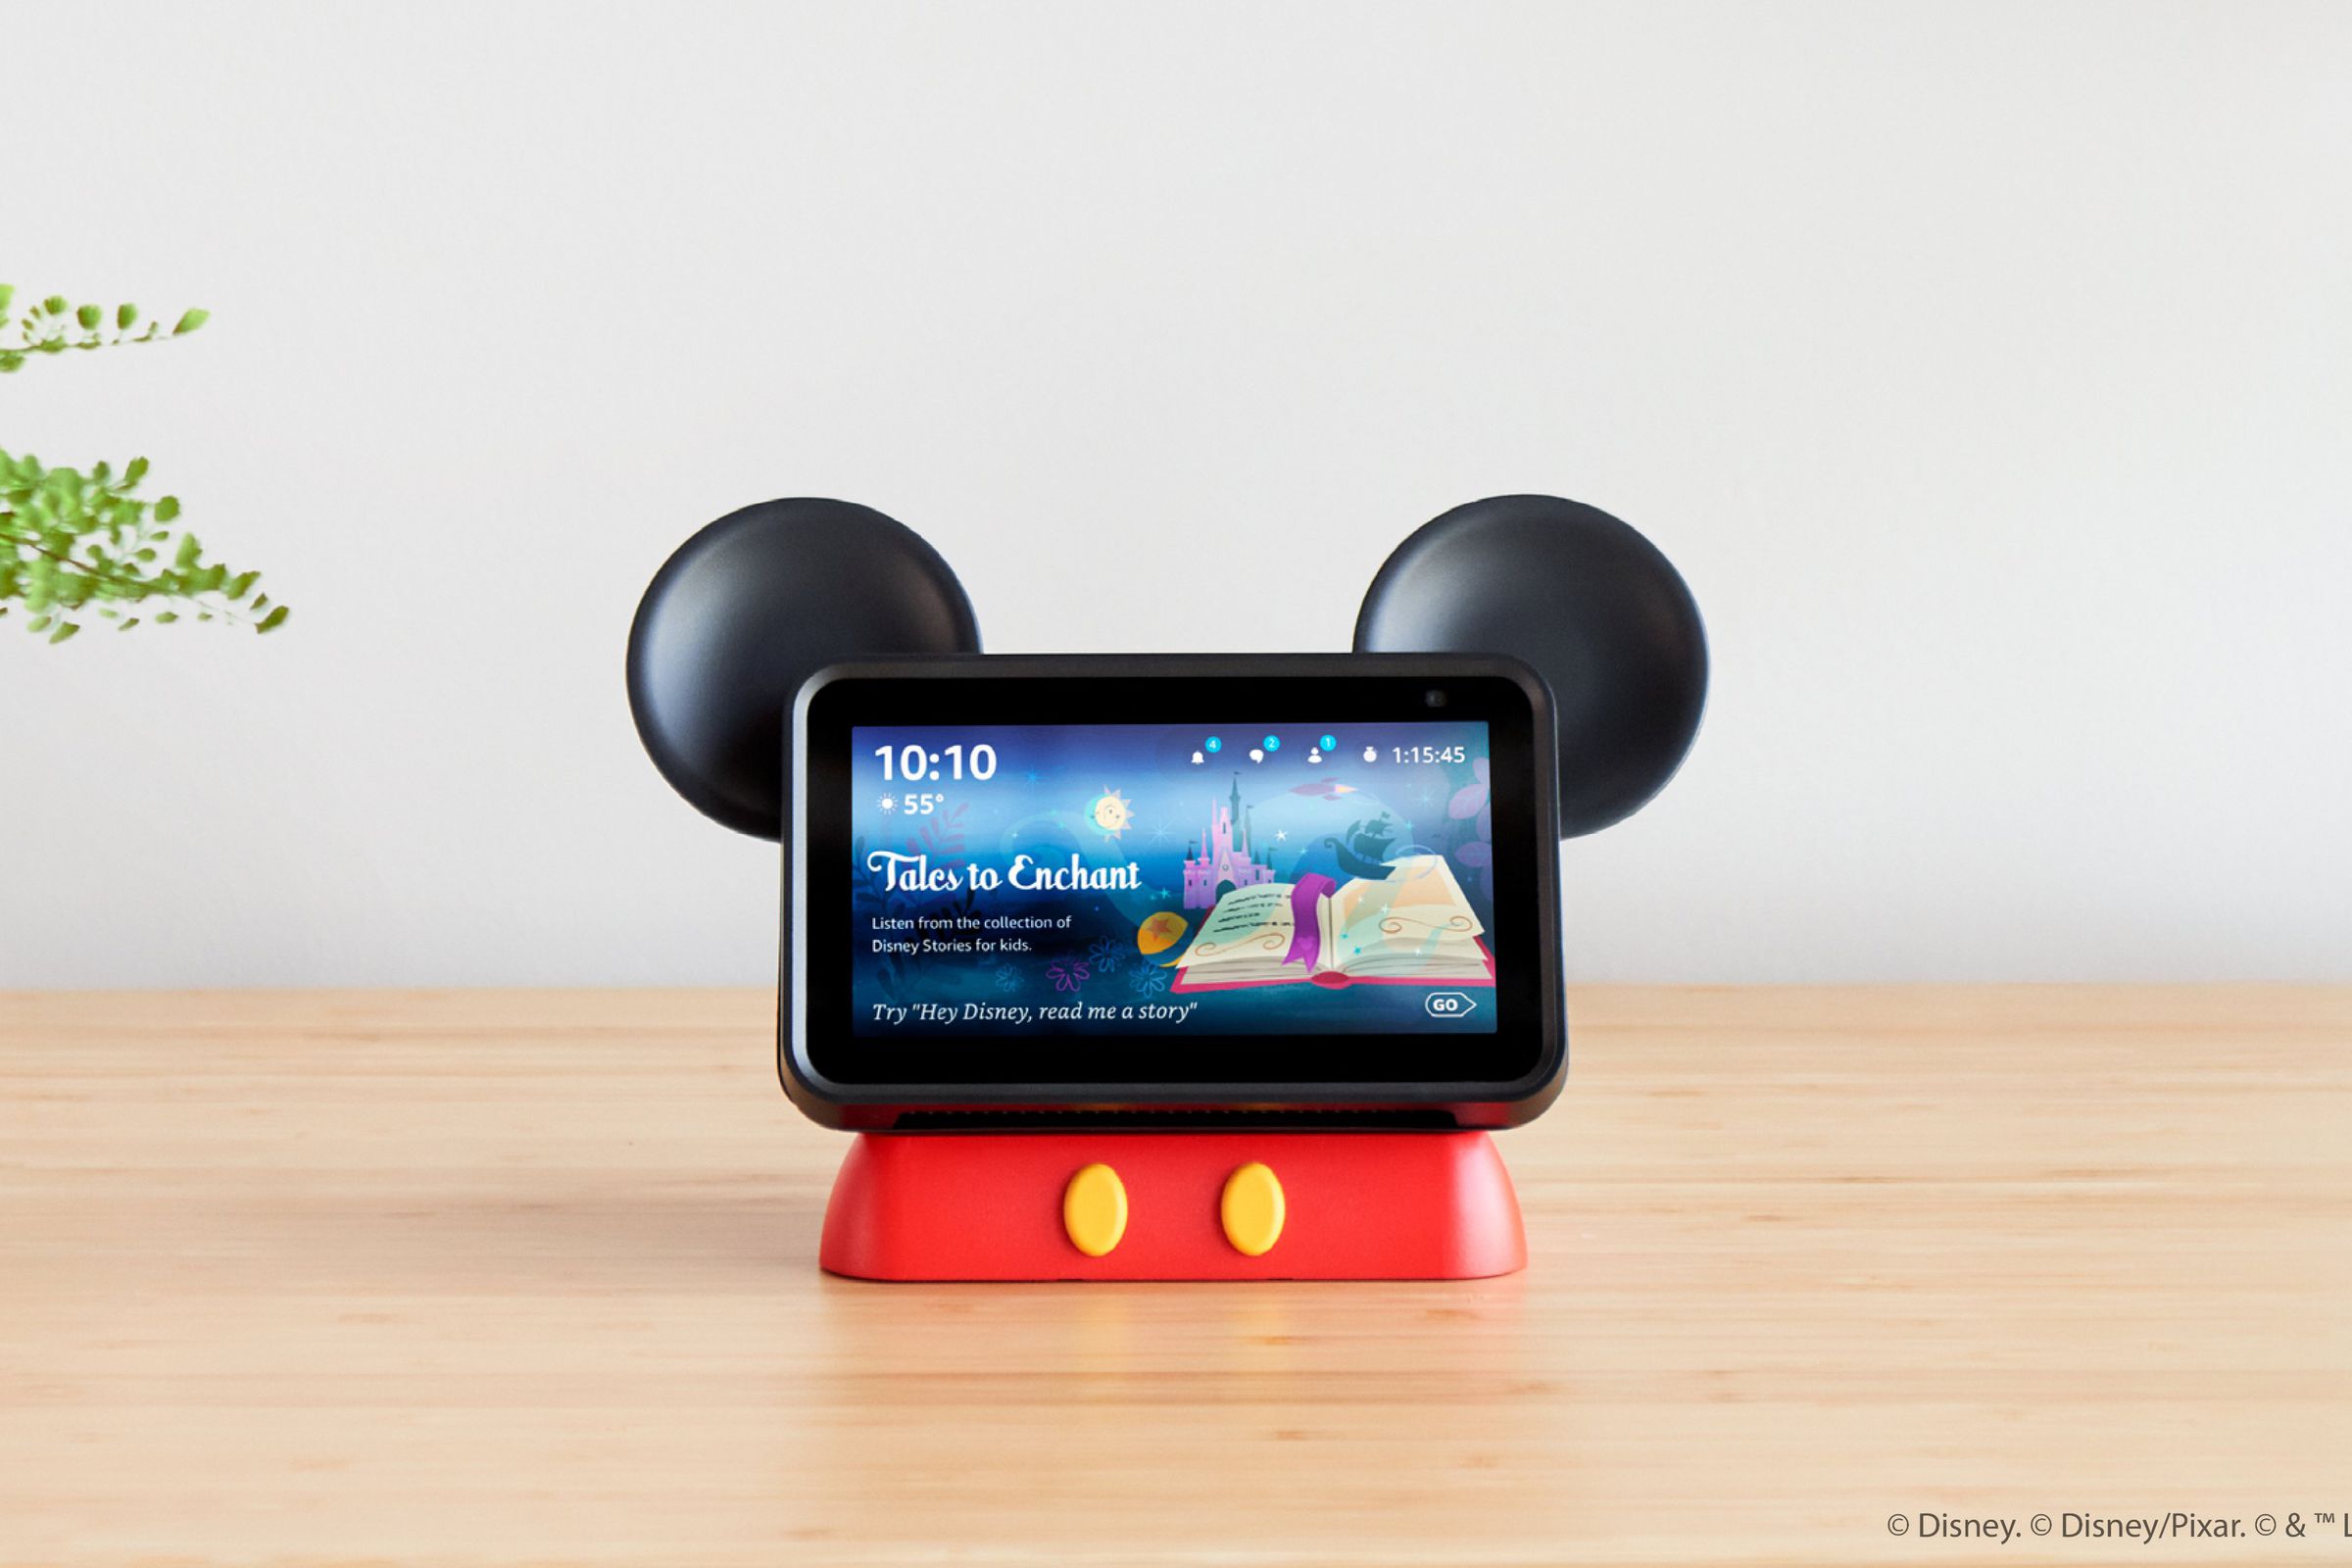 Amazon has partnered with Disney to create a custom voice assistant.